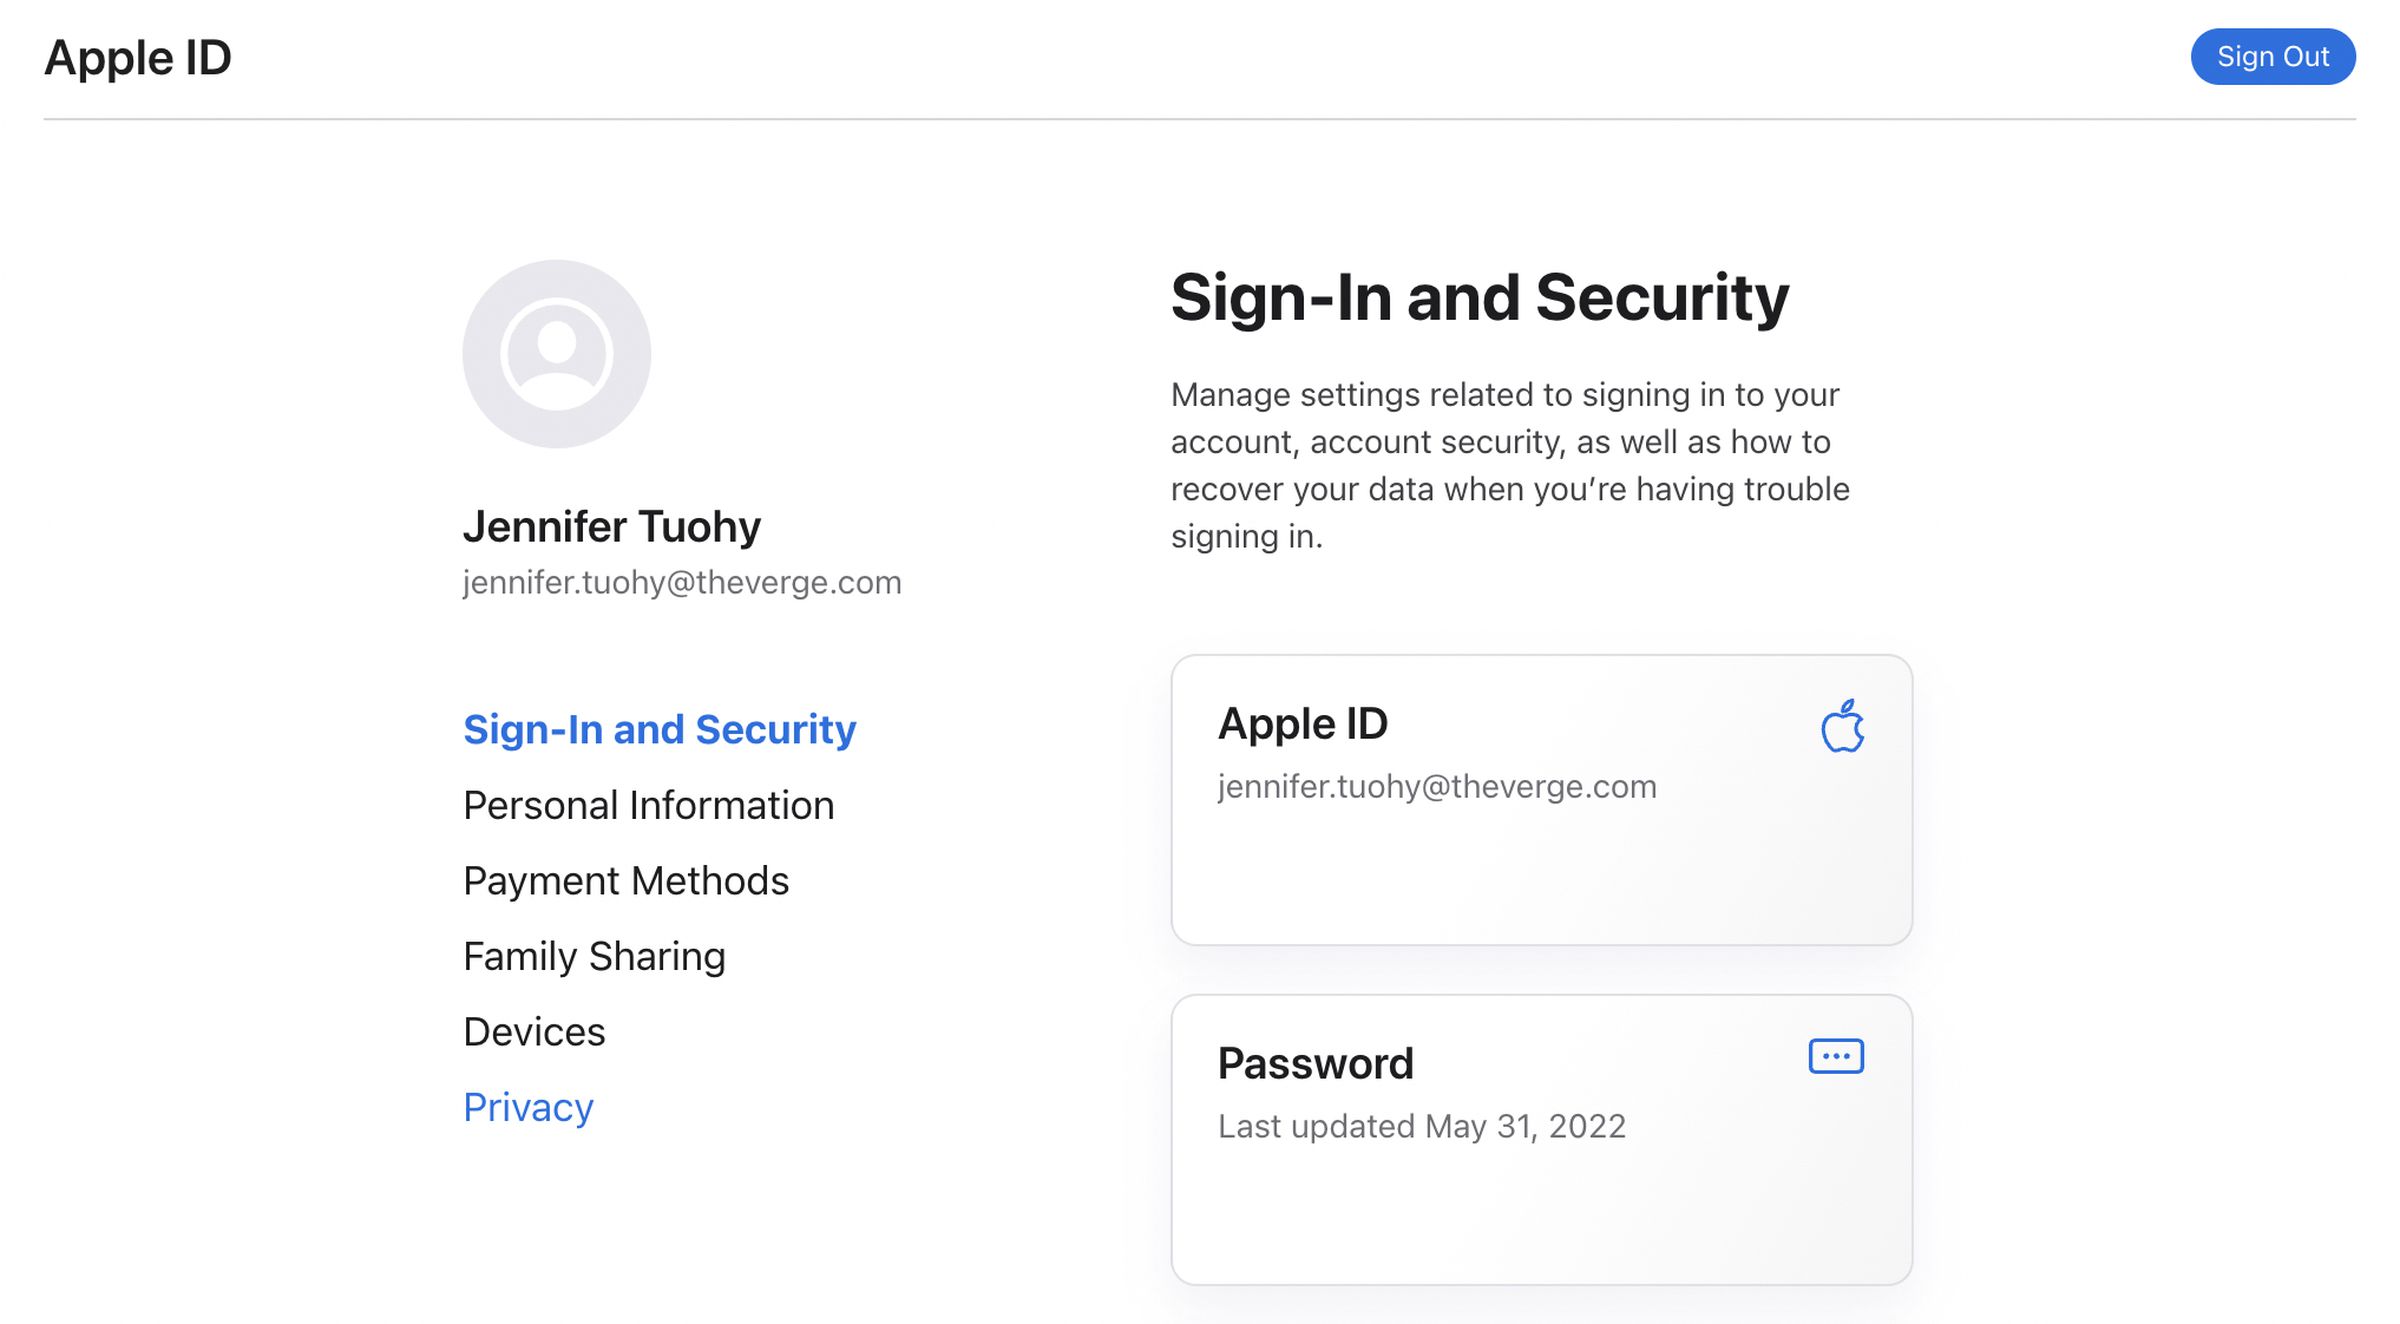 You can also change your password on Apple’s website.